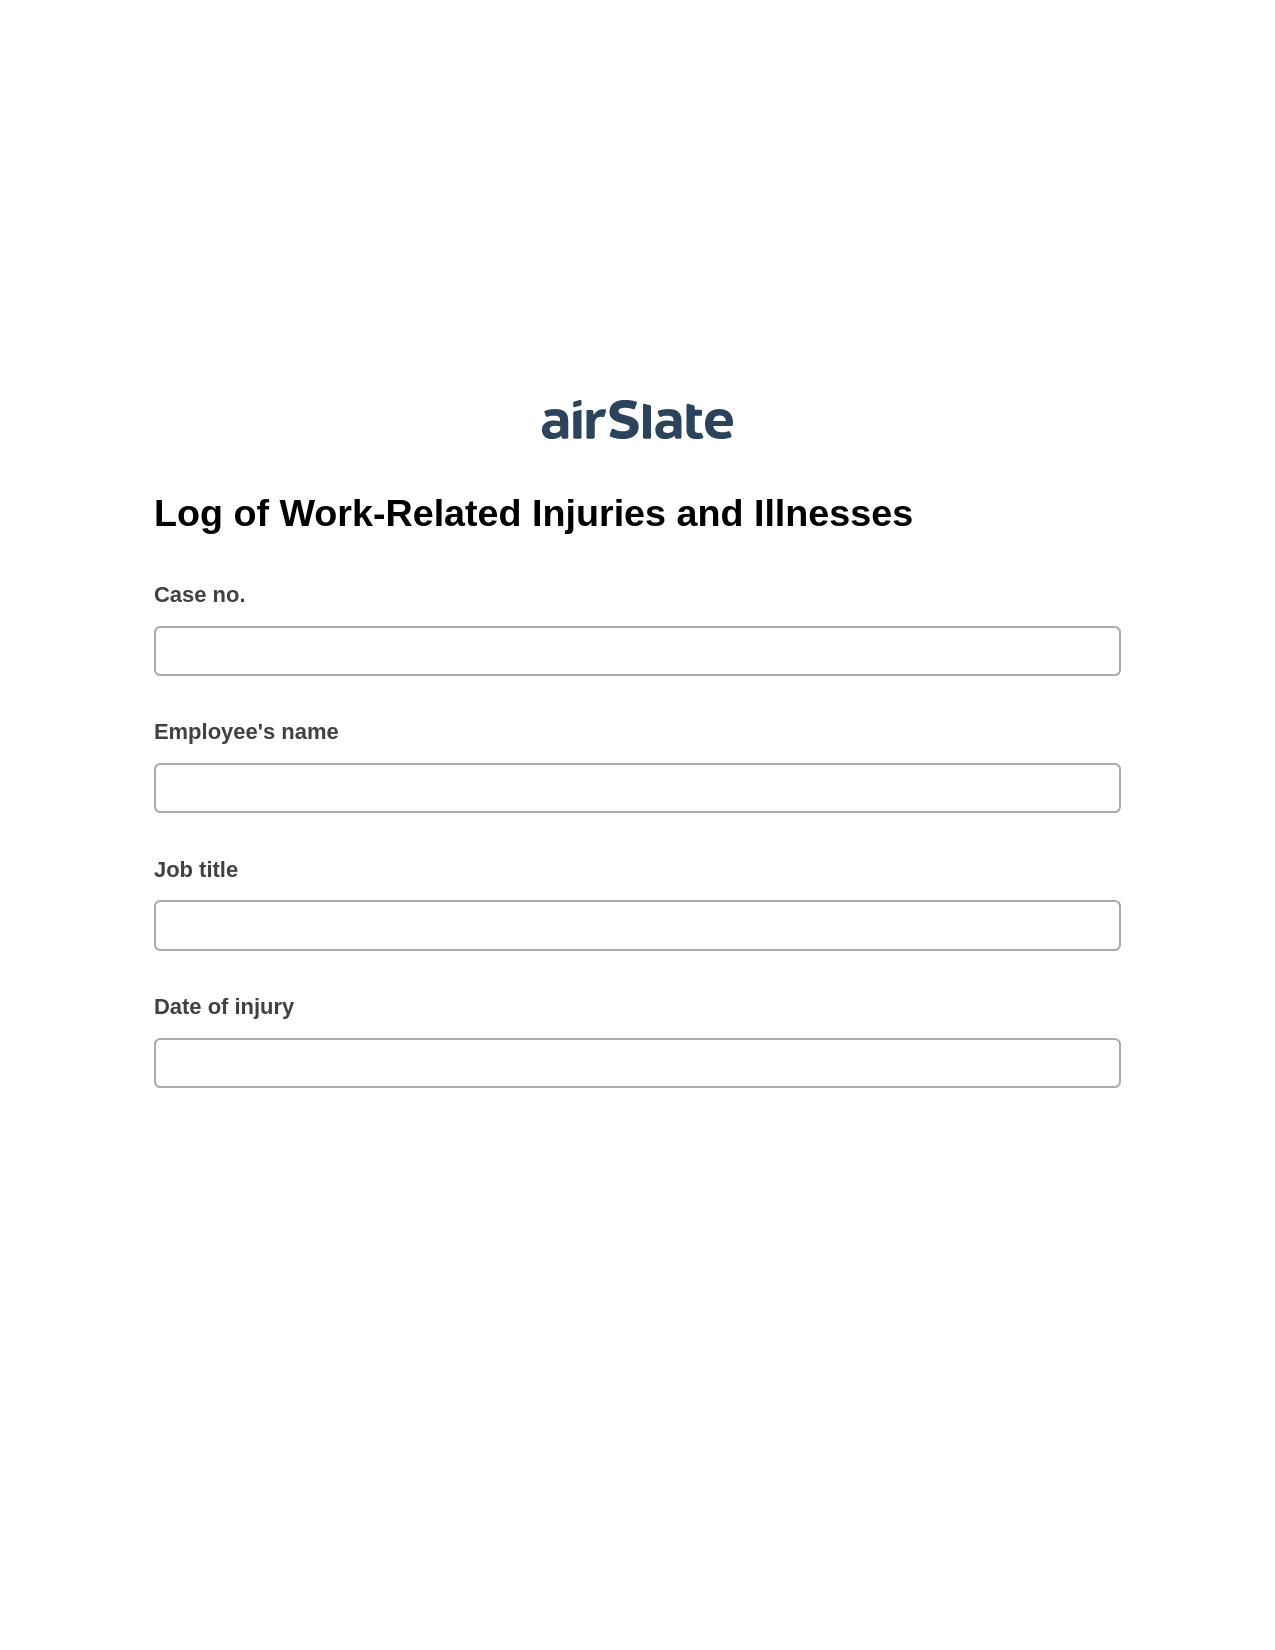 Log of Work-Related Injuries and Illnesses Pre-fill from Salesforce Records with SOQL Bot, SendGrid send Campaign bot, Export to Formstack Documents Bot